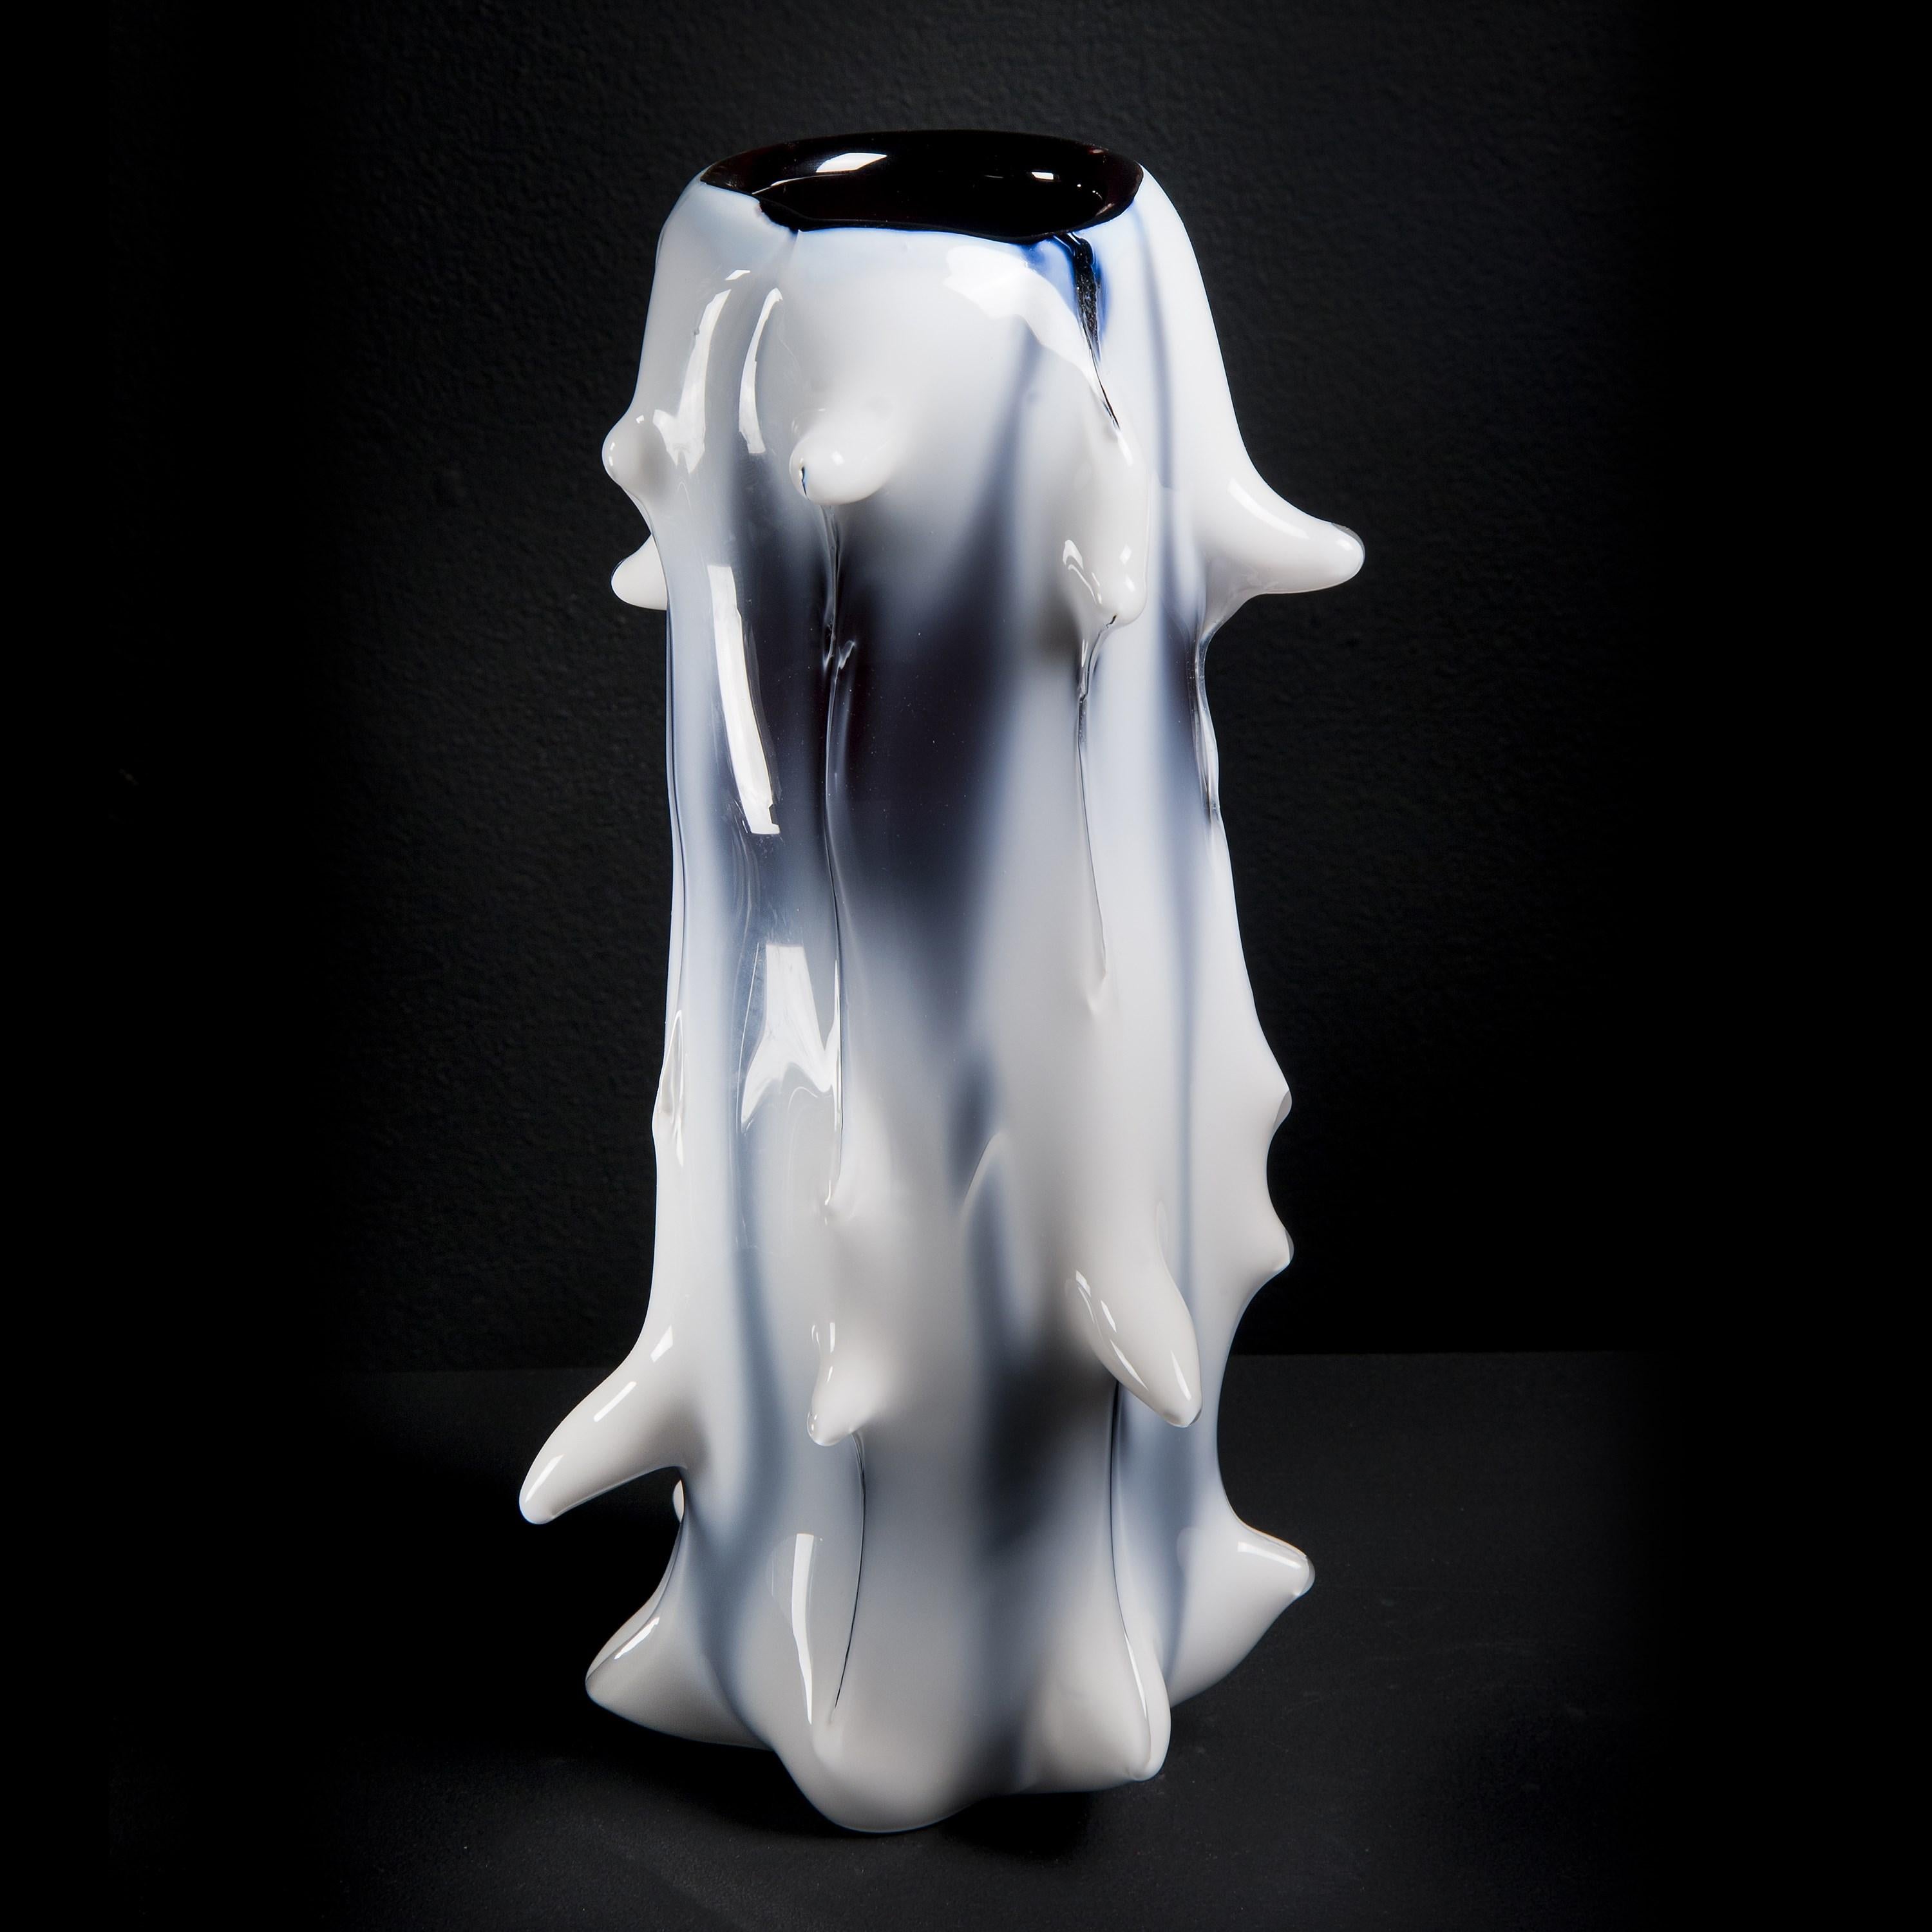 ‘Spinal II' is a limited edition (ed 49) tree-inspired white & aubergine glass vase by the Swedish artist, Mårten Medbo.

Among his work, there are numerous examples of pieces having a resemblance to anthropomorphic or biomorphic structures, without